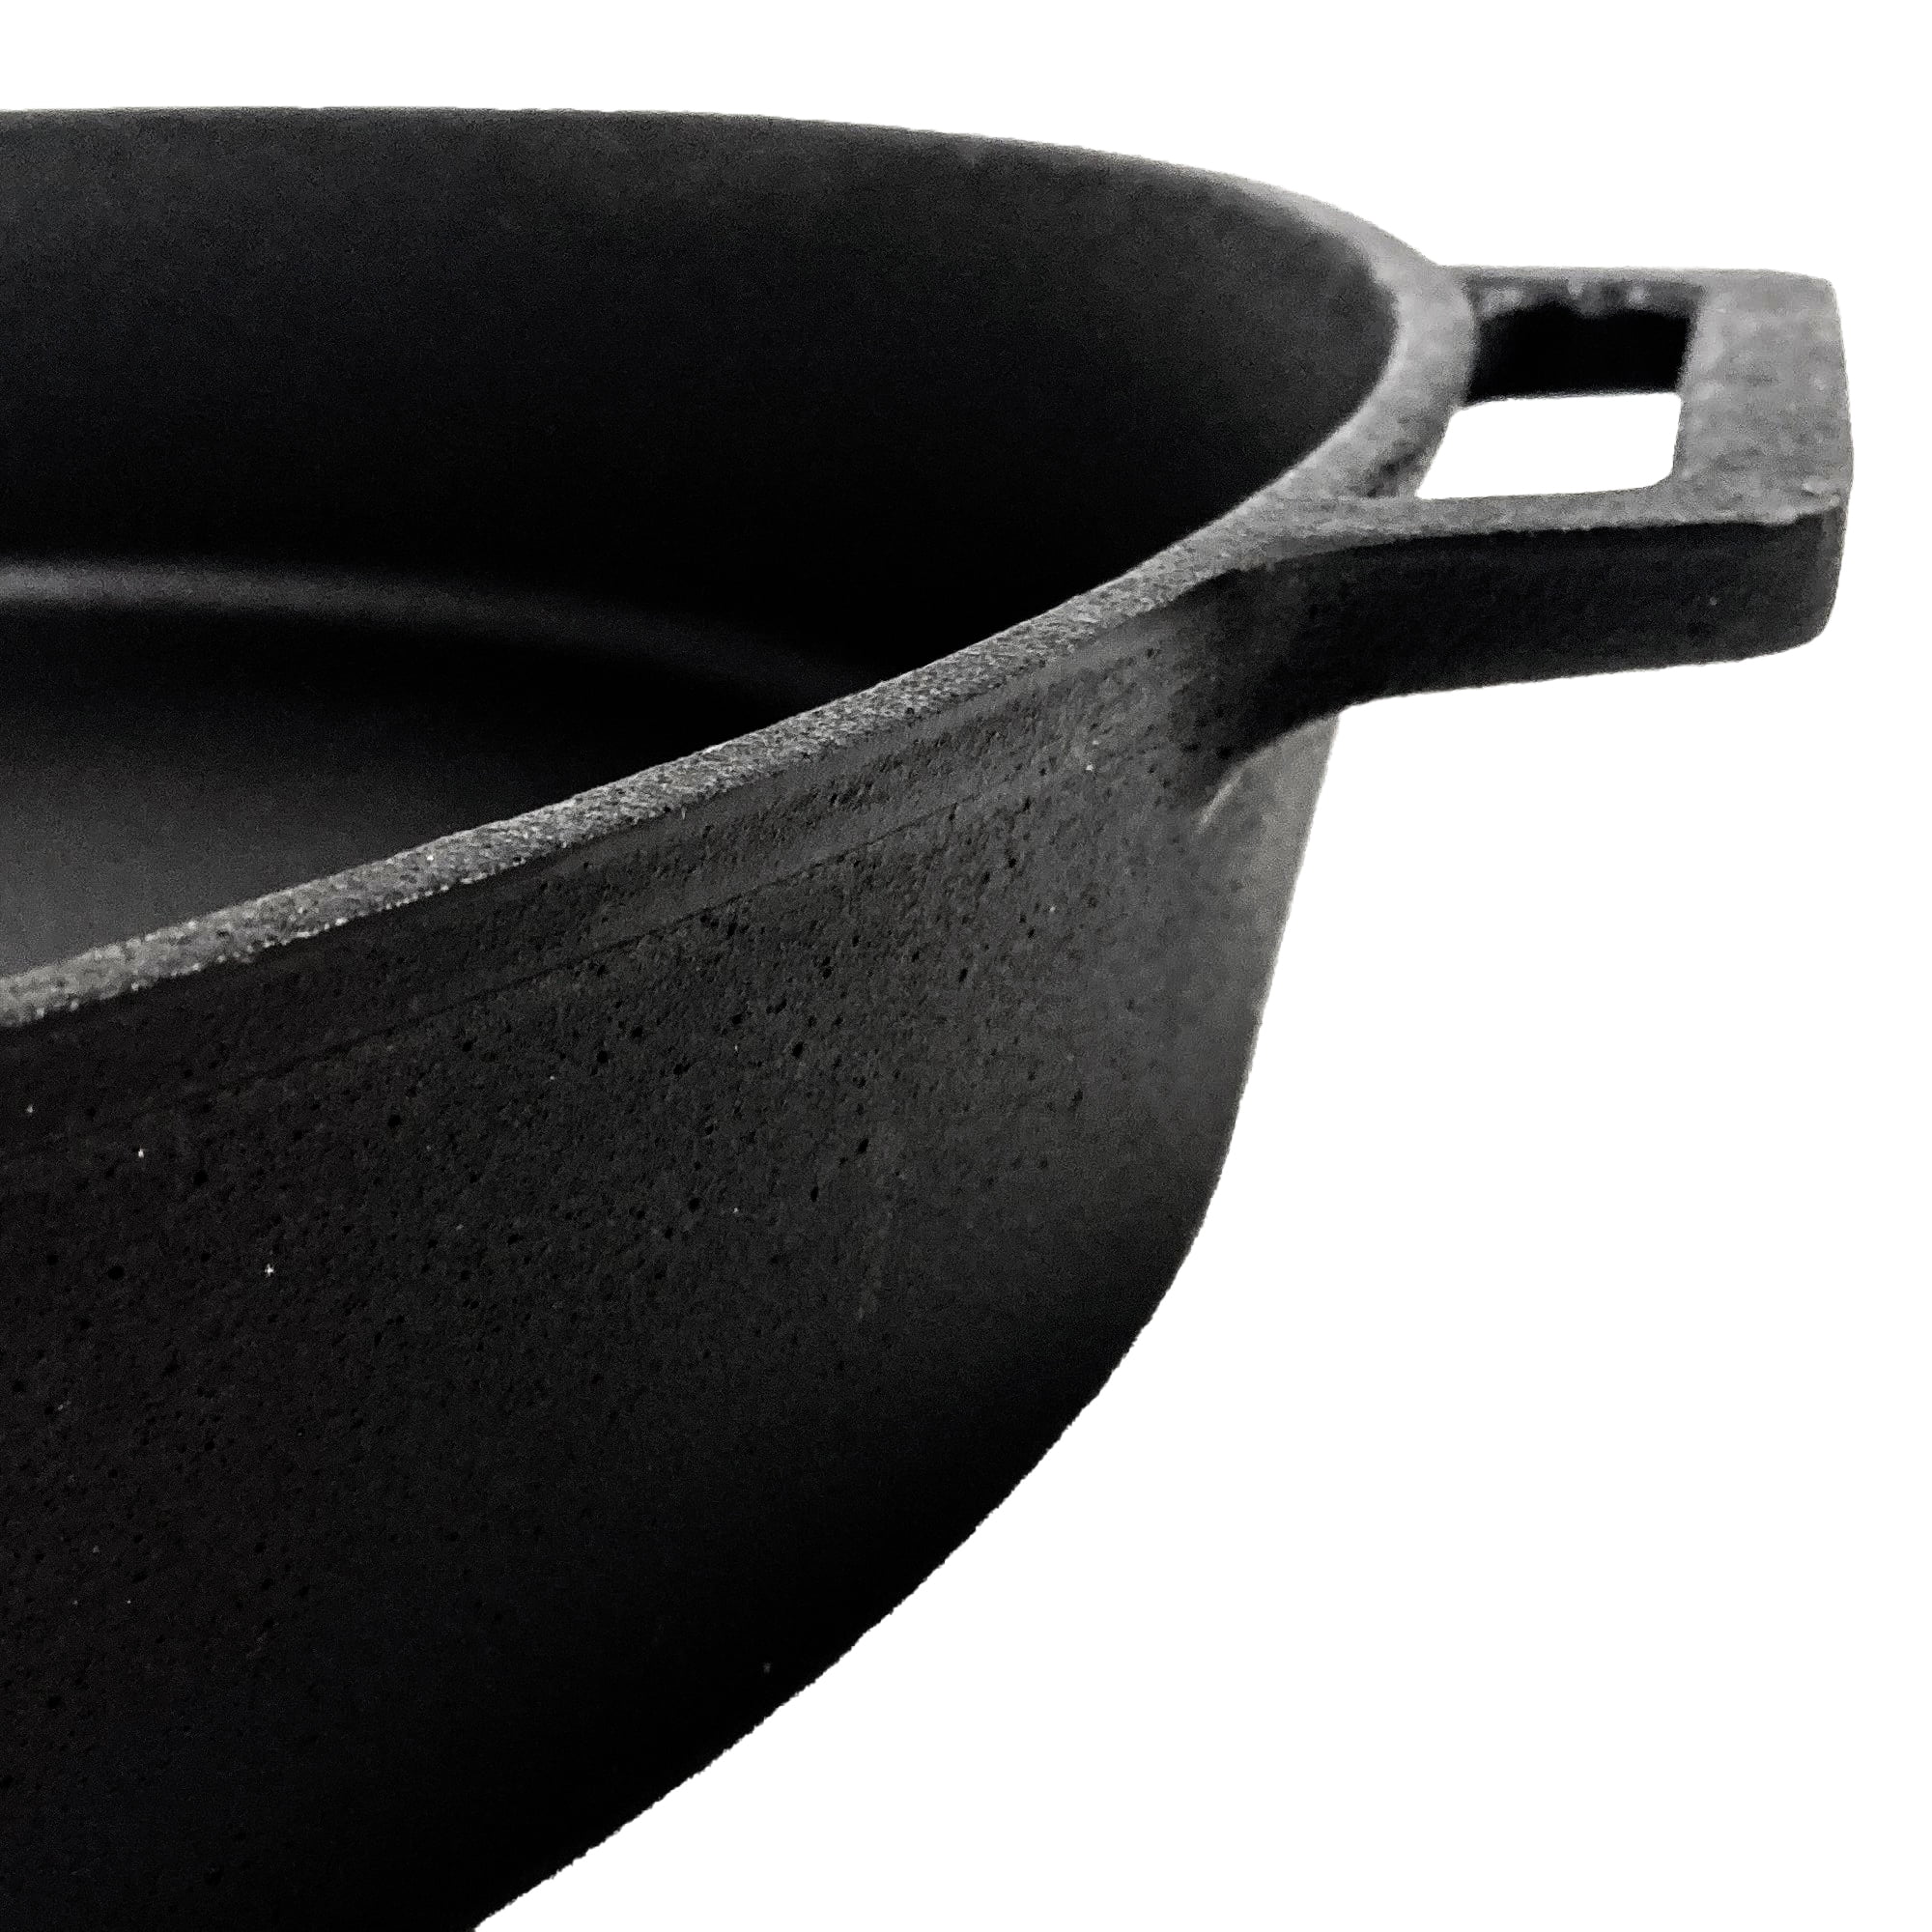  Large Cast Iron Skillet 20 Inch